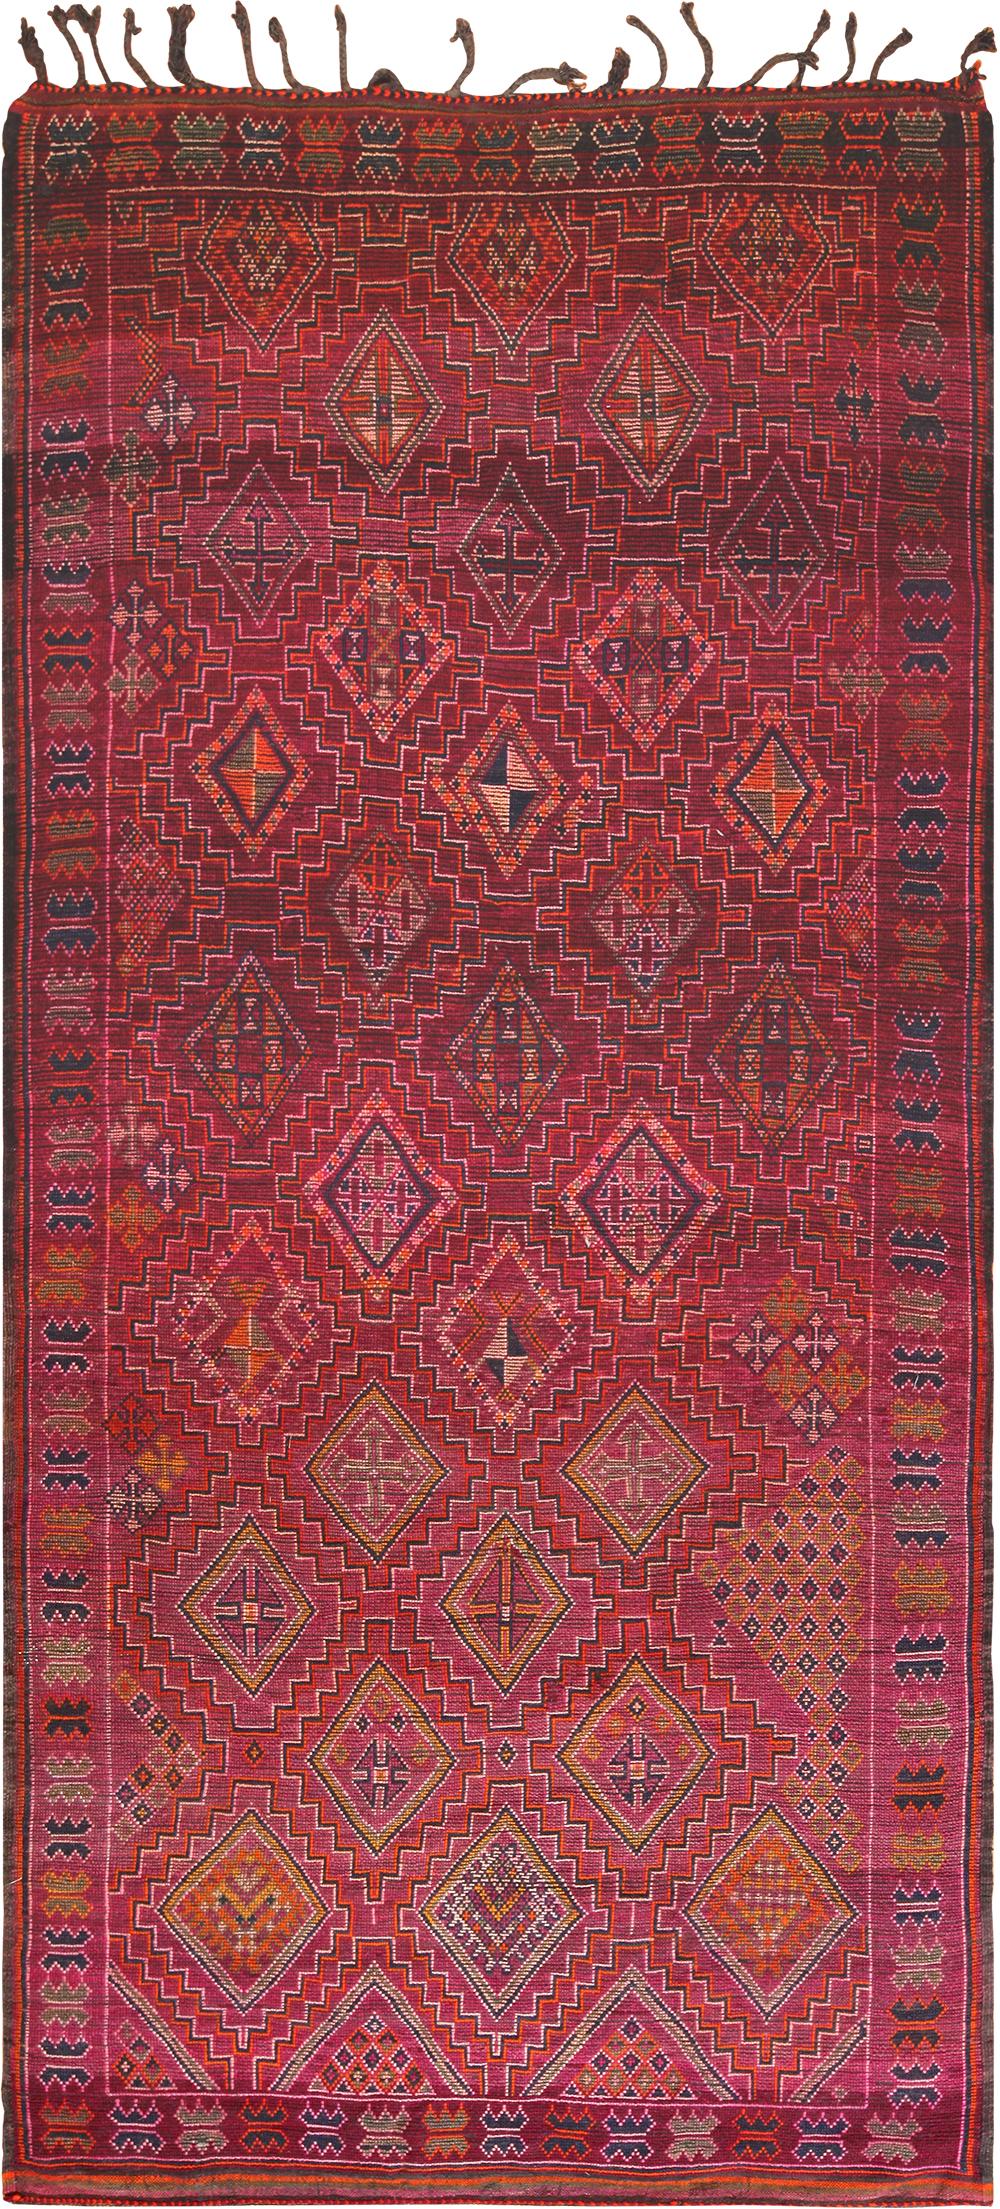 Beautiful Folk Art midcentury vintage purple Moroccan rug, country of origin: Morocco, date circa mid-20th century. Size: 6 ft. x 12 ft. (1.83 m x 3.66 m).